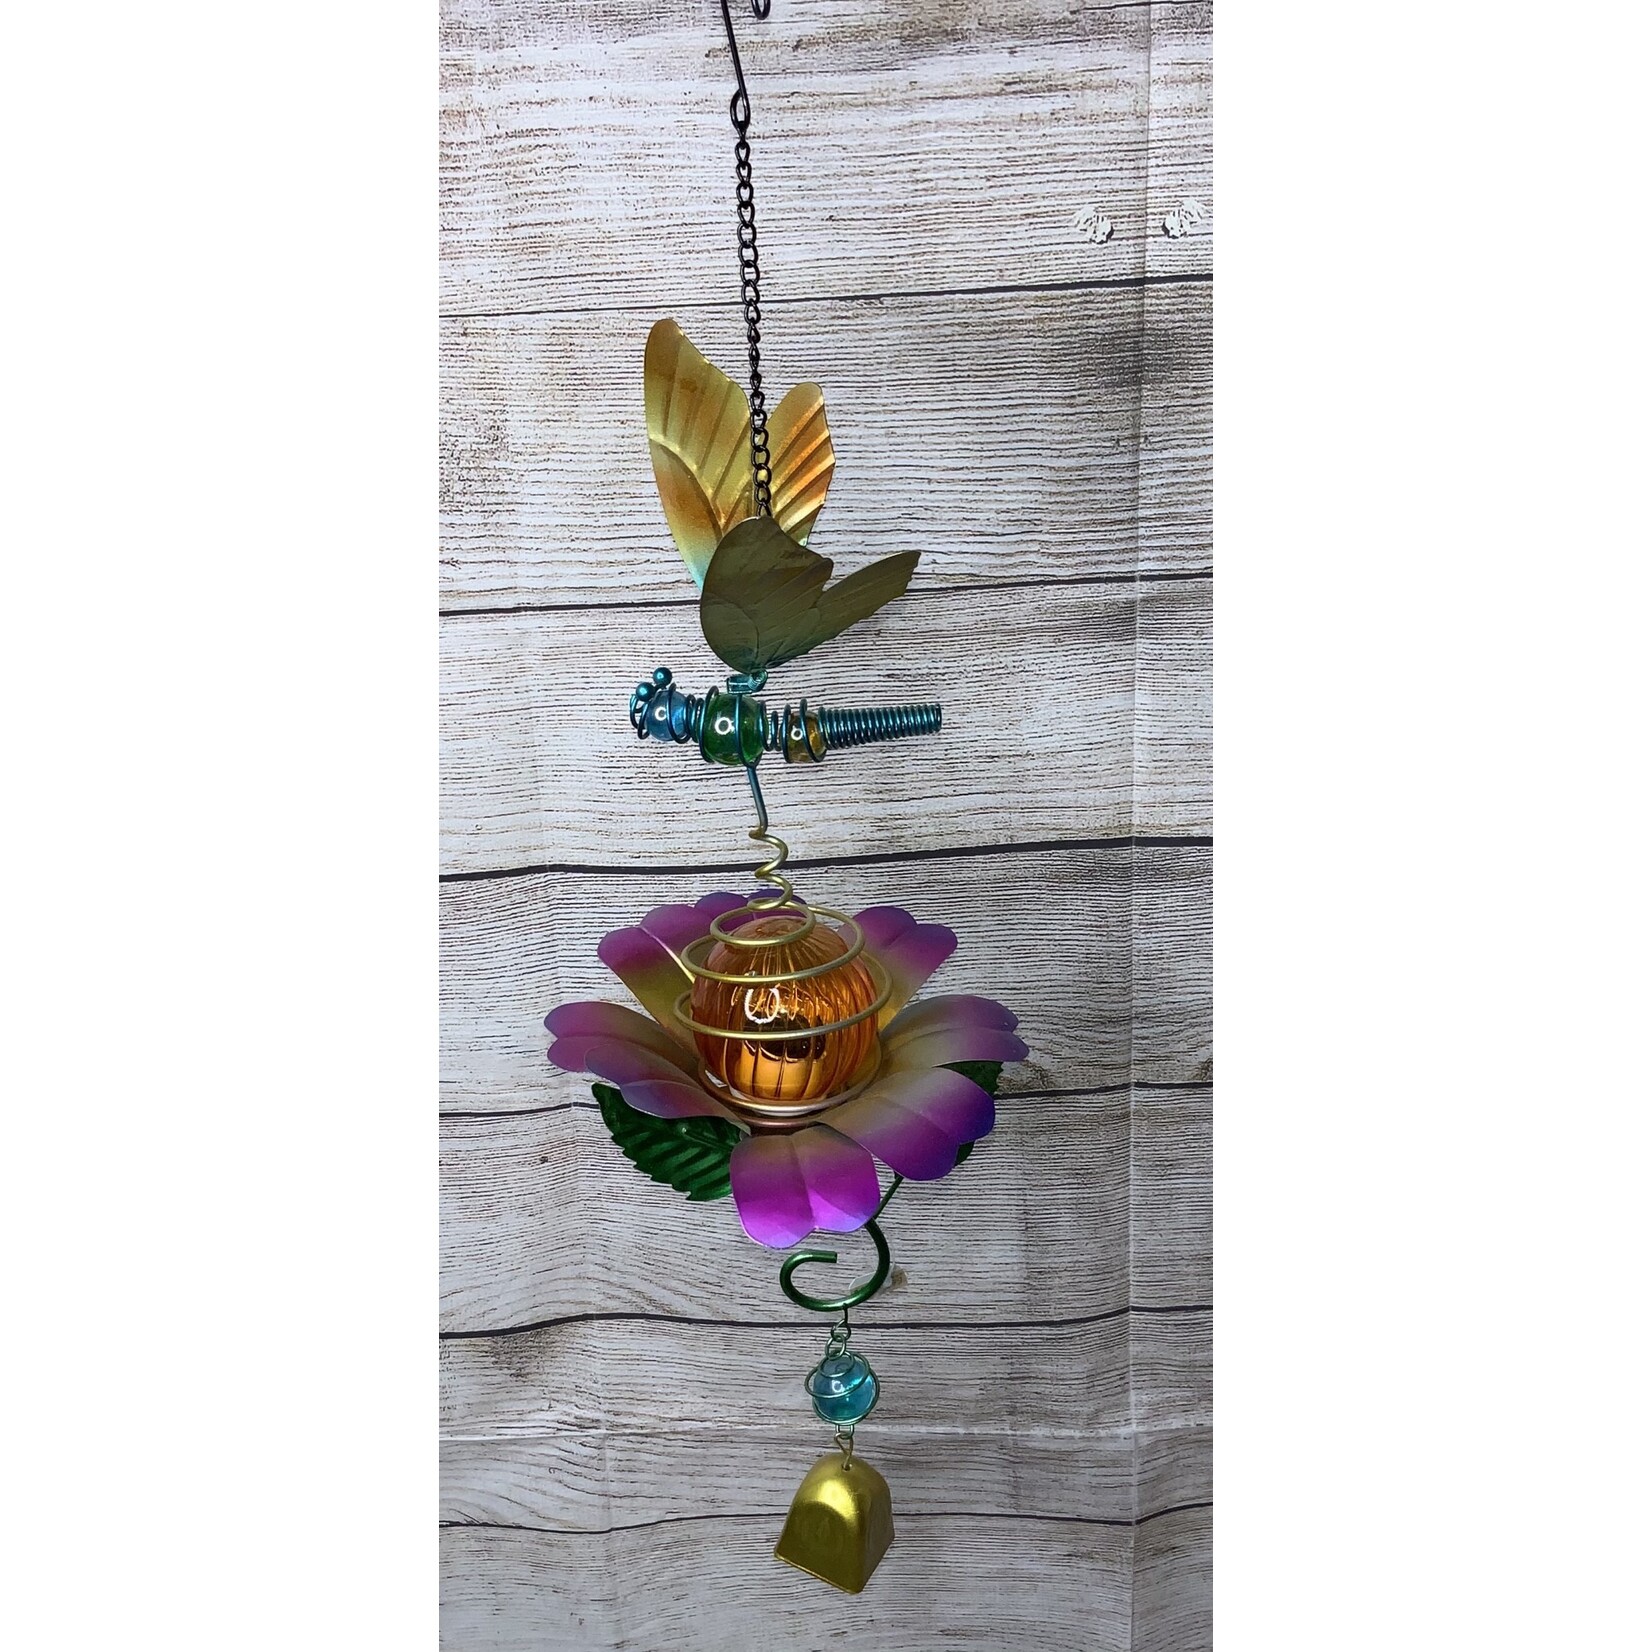 Gerson Solar Dragonfly Hanging